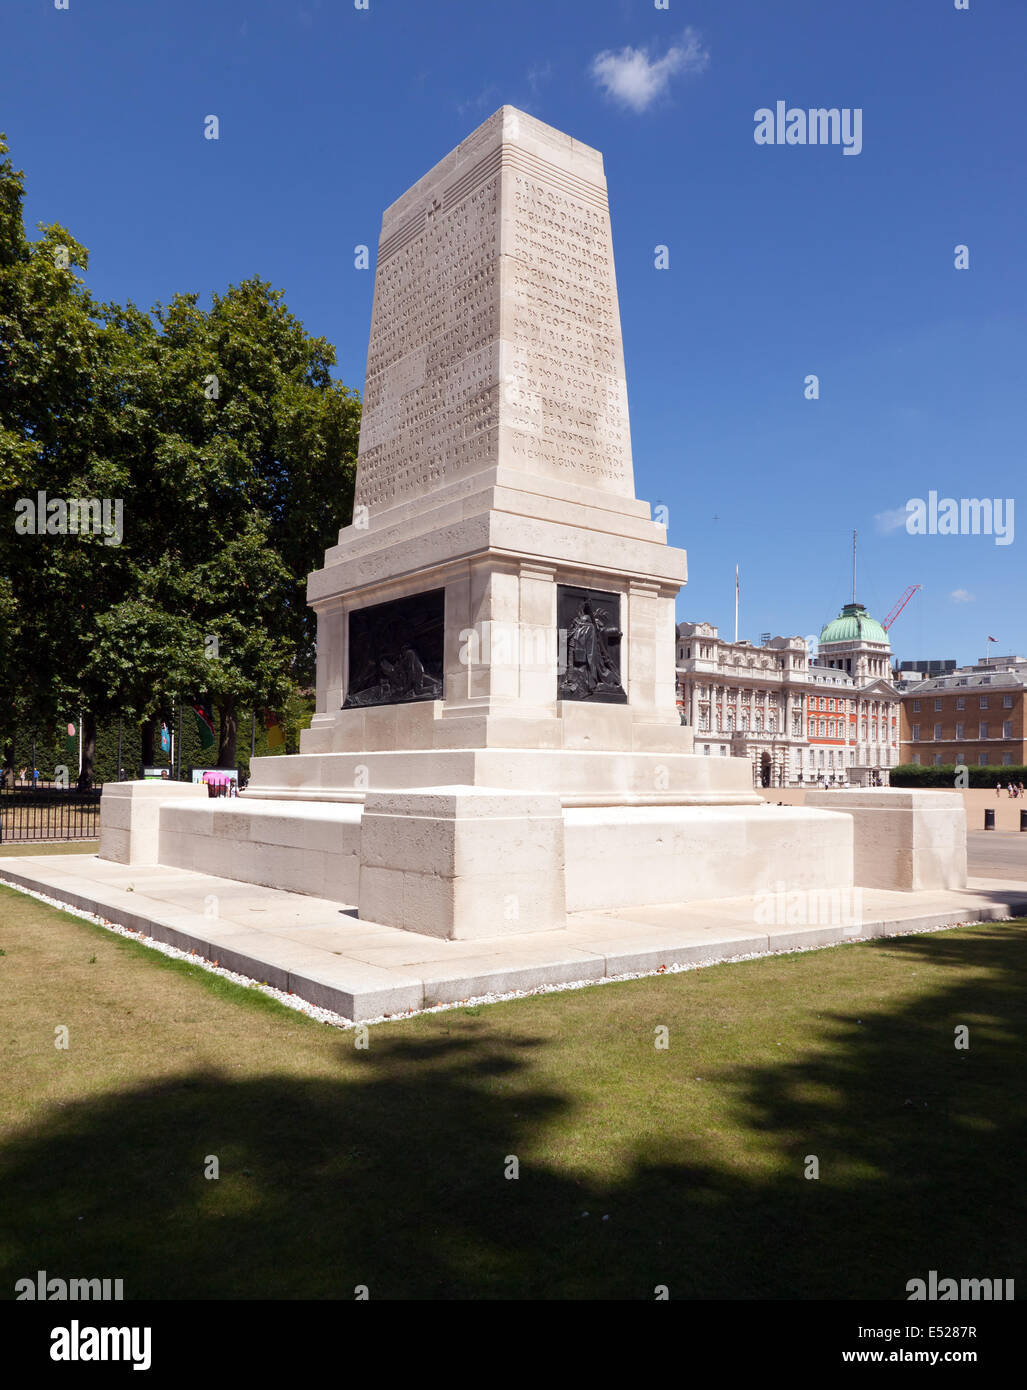 Wide-angle view  of the Guards Memorial, Horse Guards Parade, London. Stock Photo